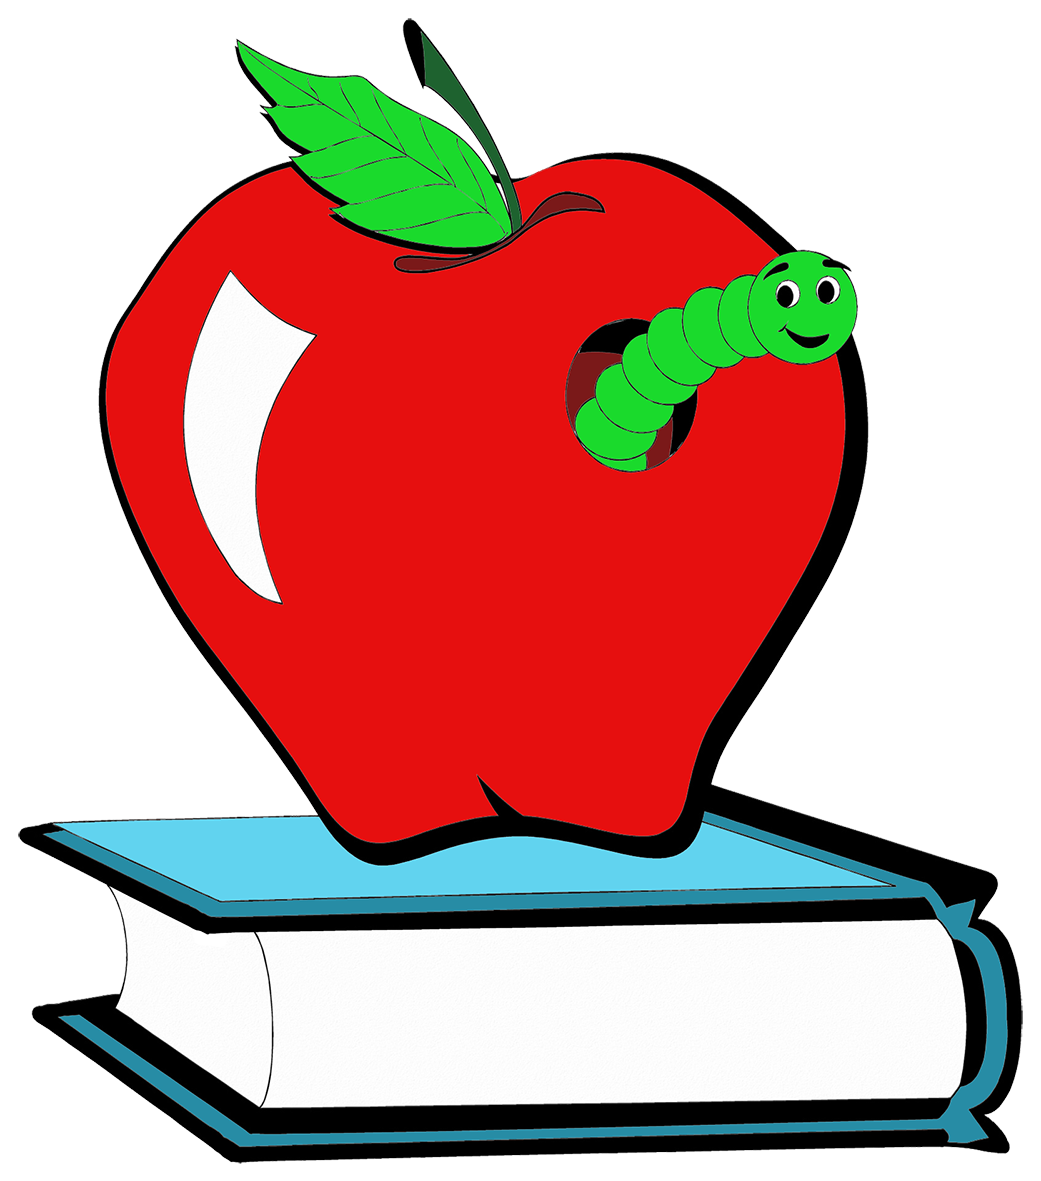 red apple with book worm